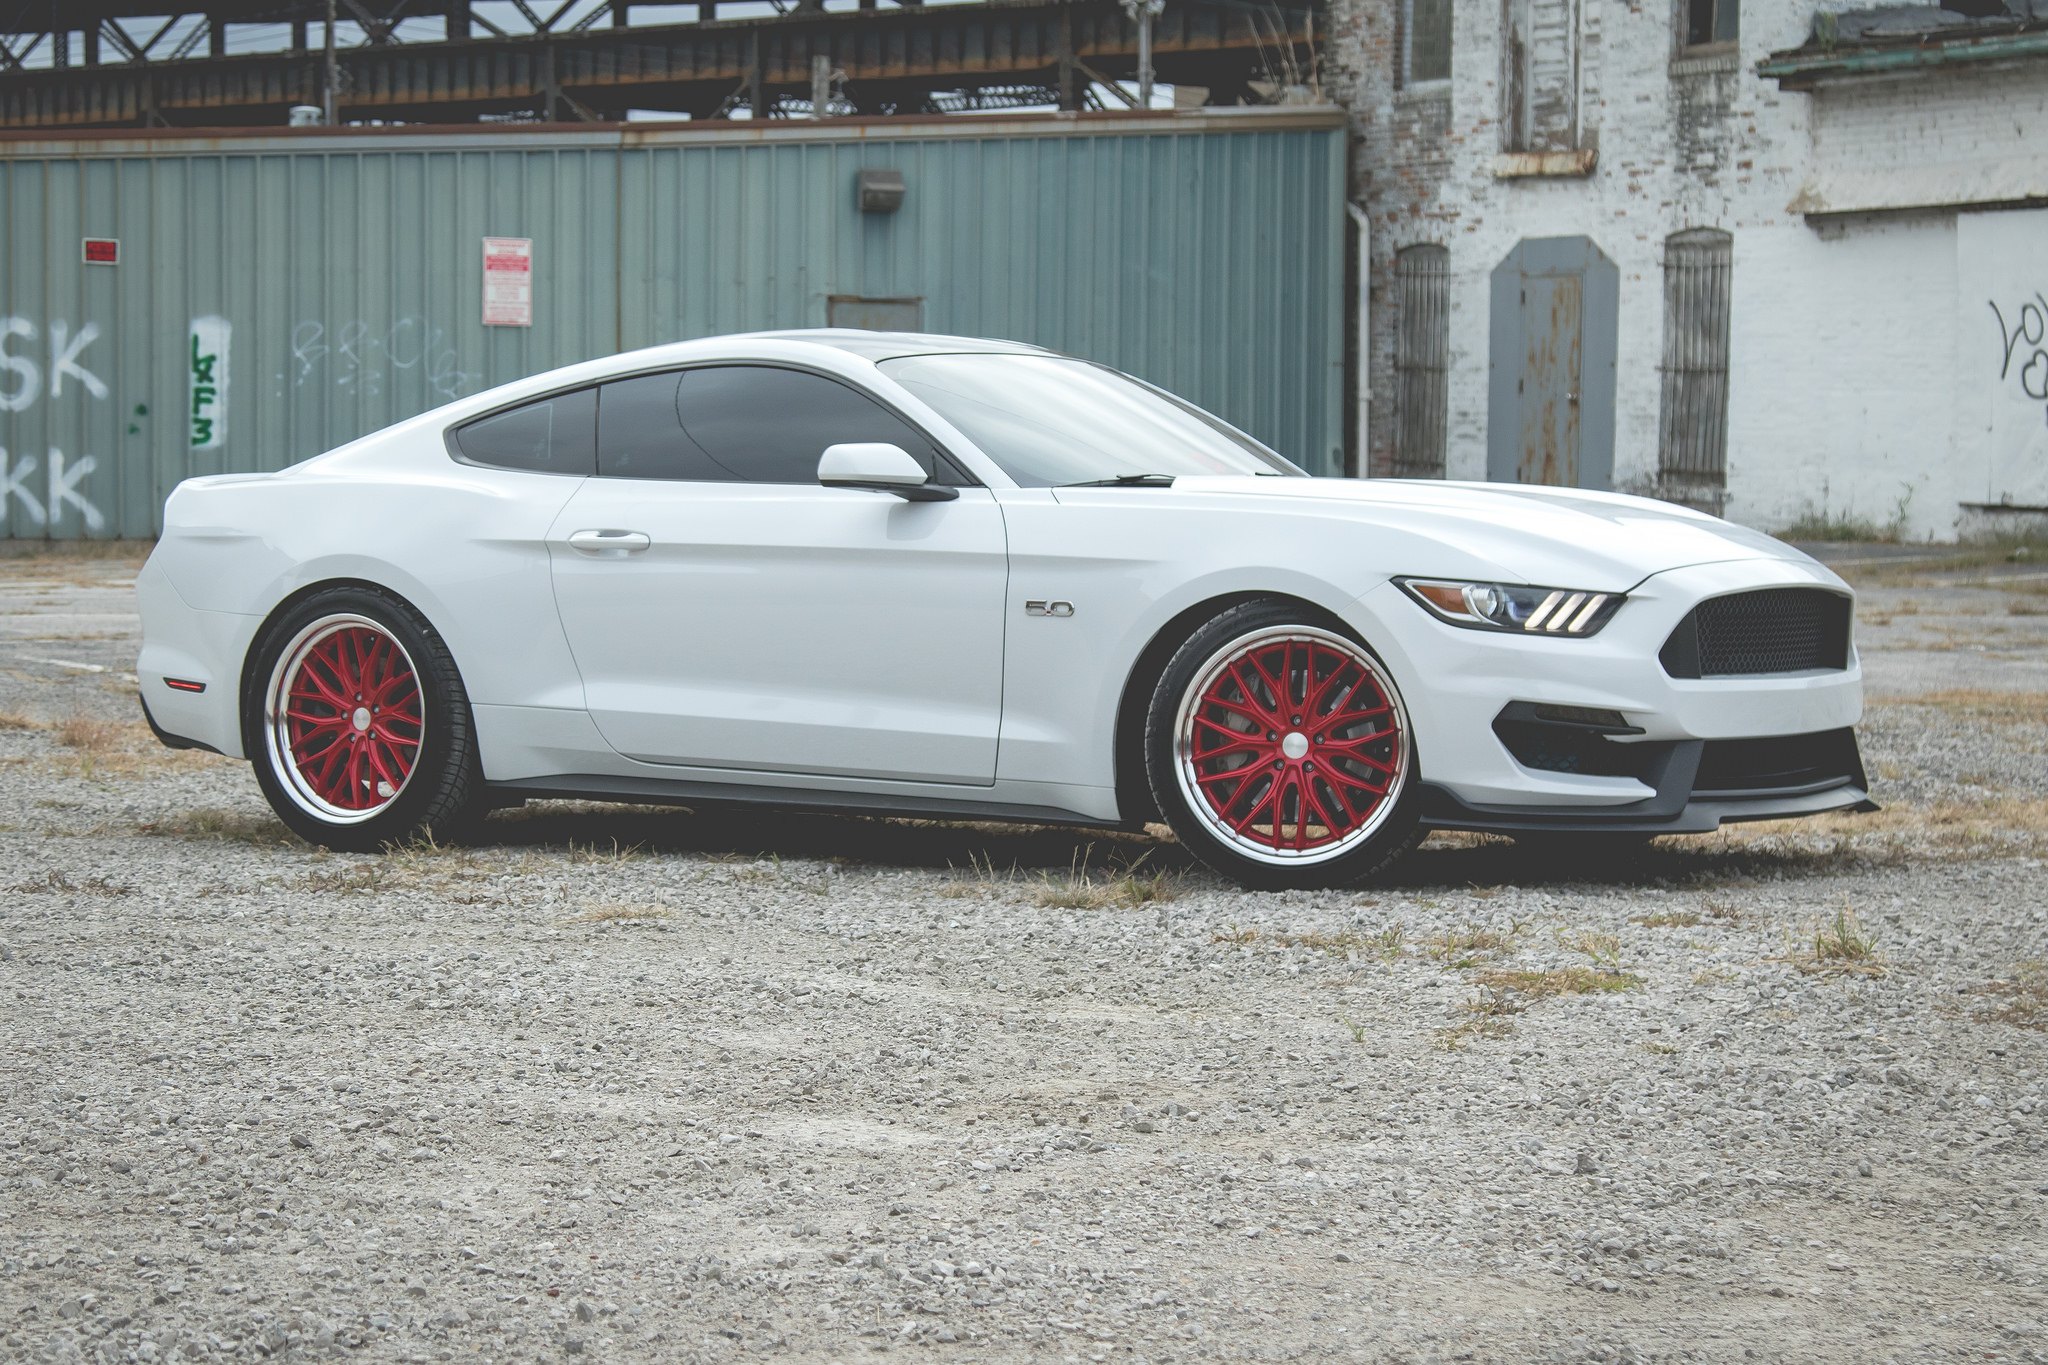 Aftermarket Side Skirts on White Ford Mustang - Photo by Vossen